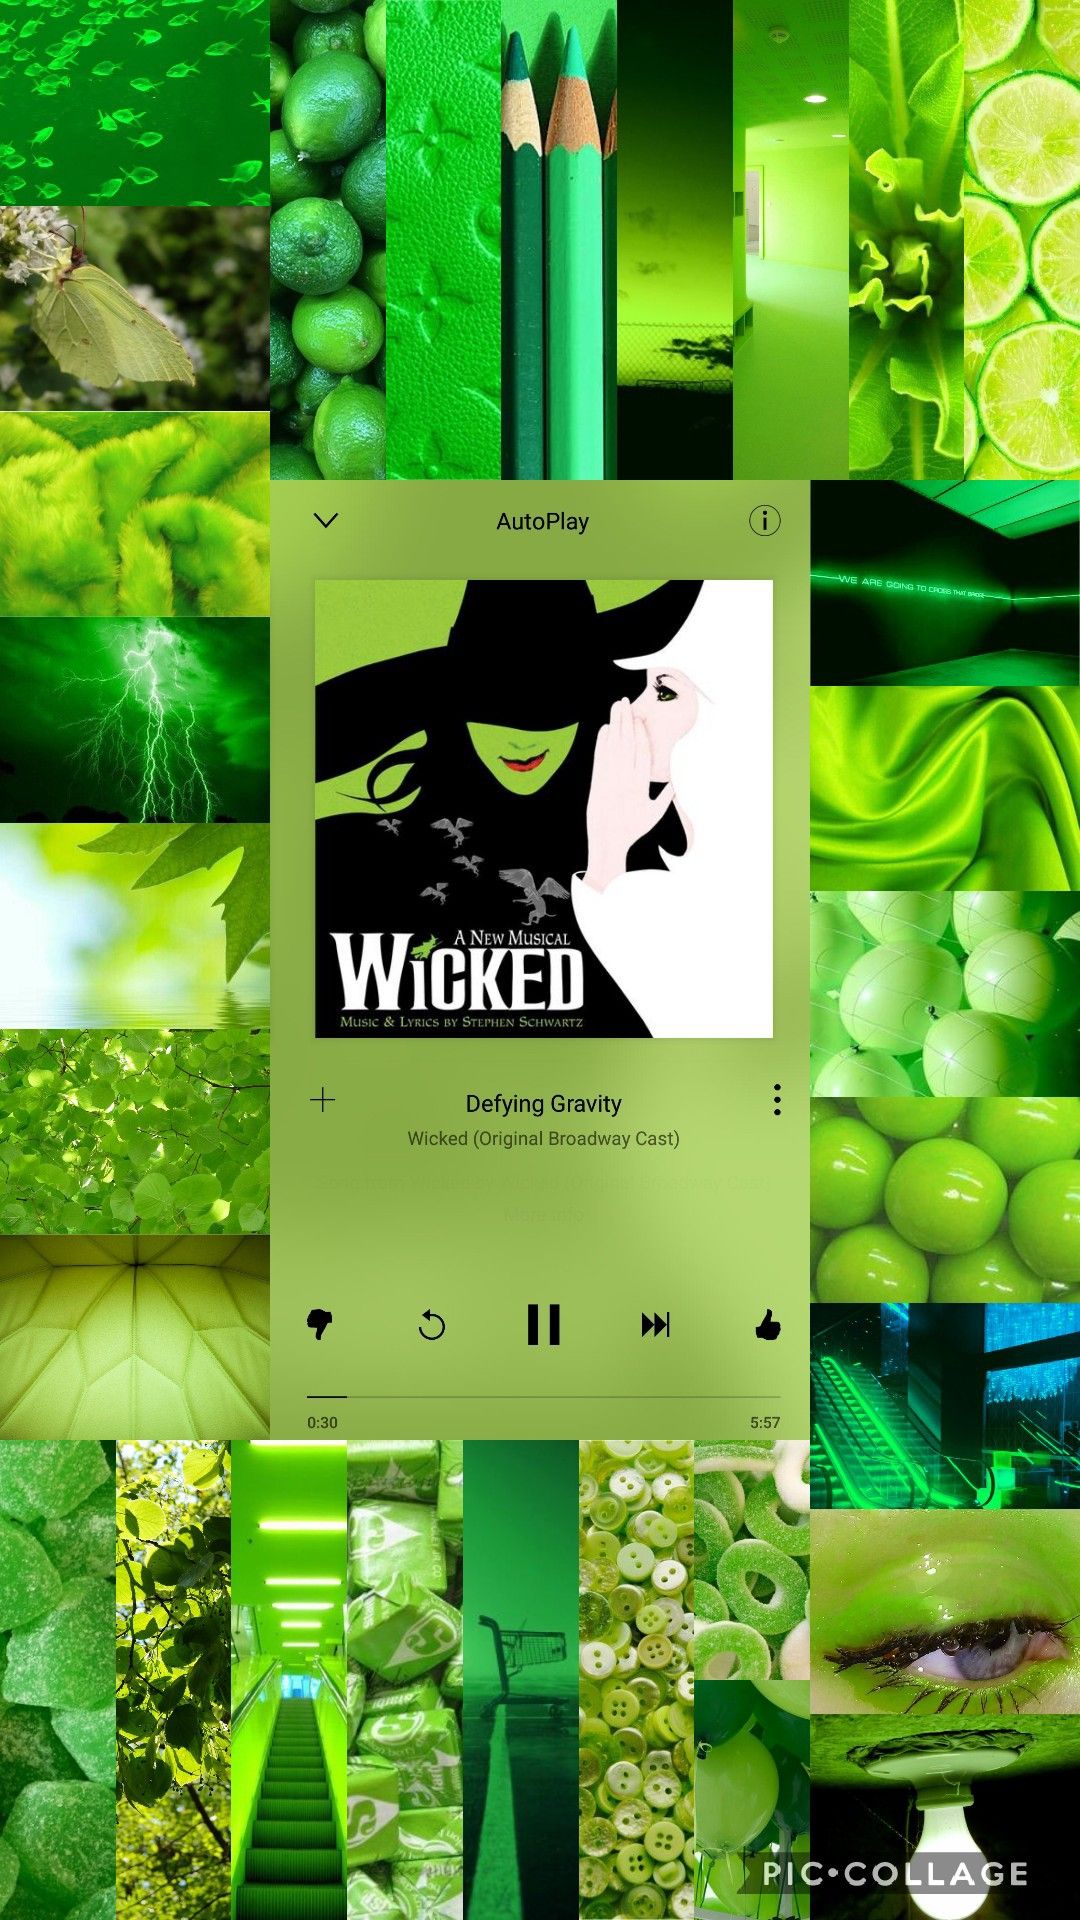 Broadway musicals. Defying gravity, Profile picture, Musicals